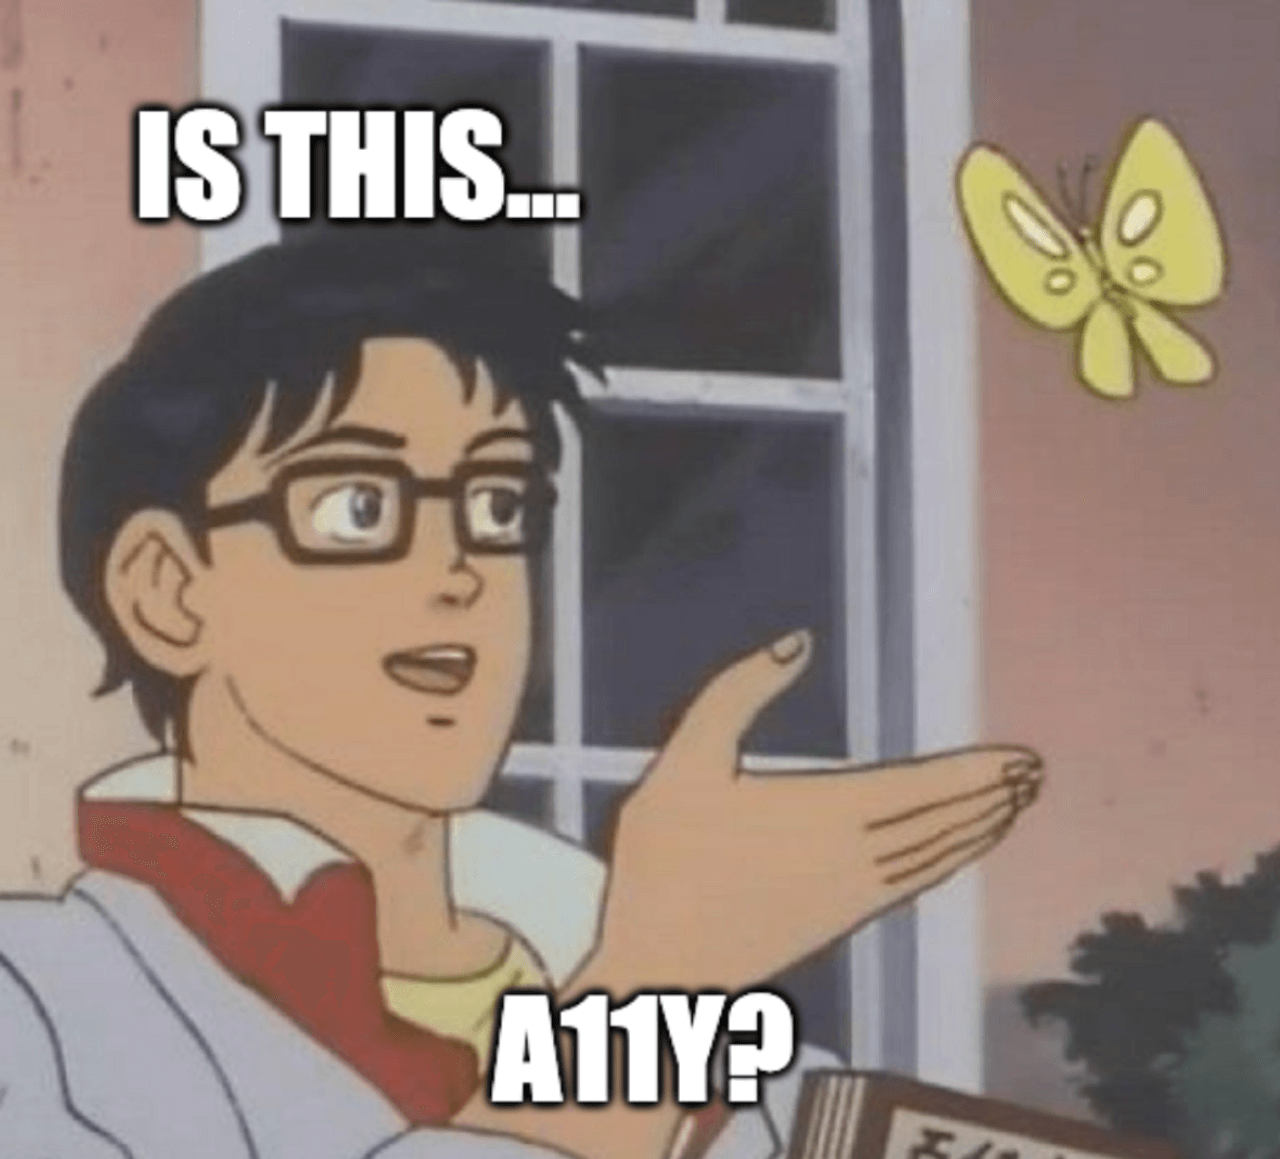 Meme of man looking at butterfly, wondering if this is accessibility